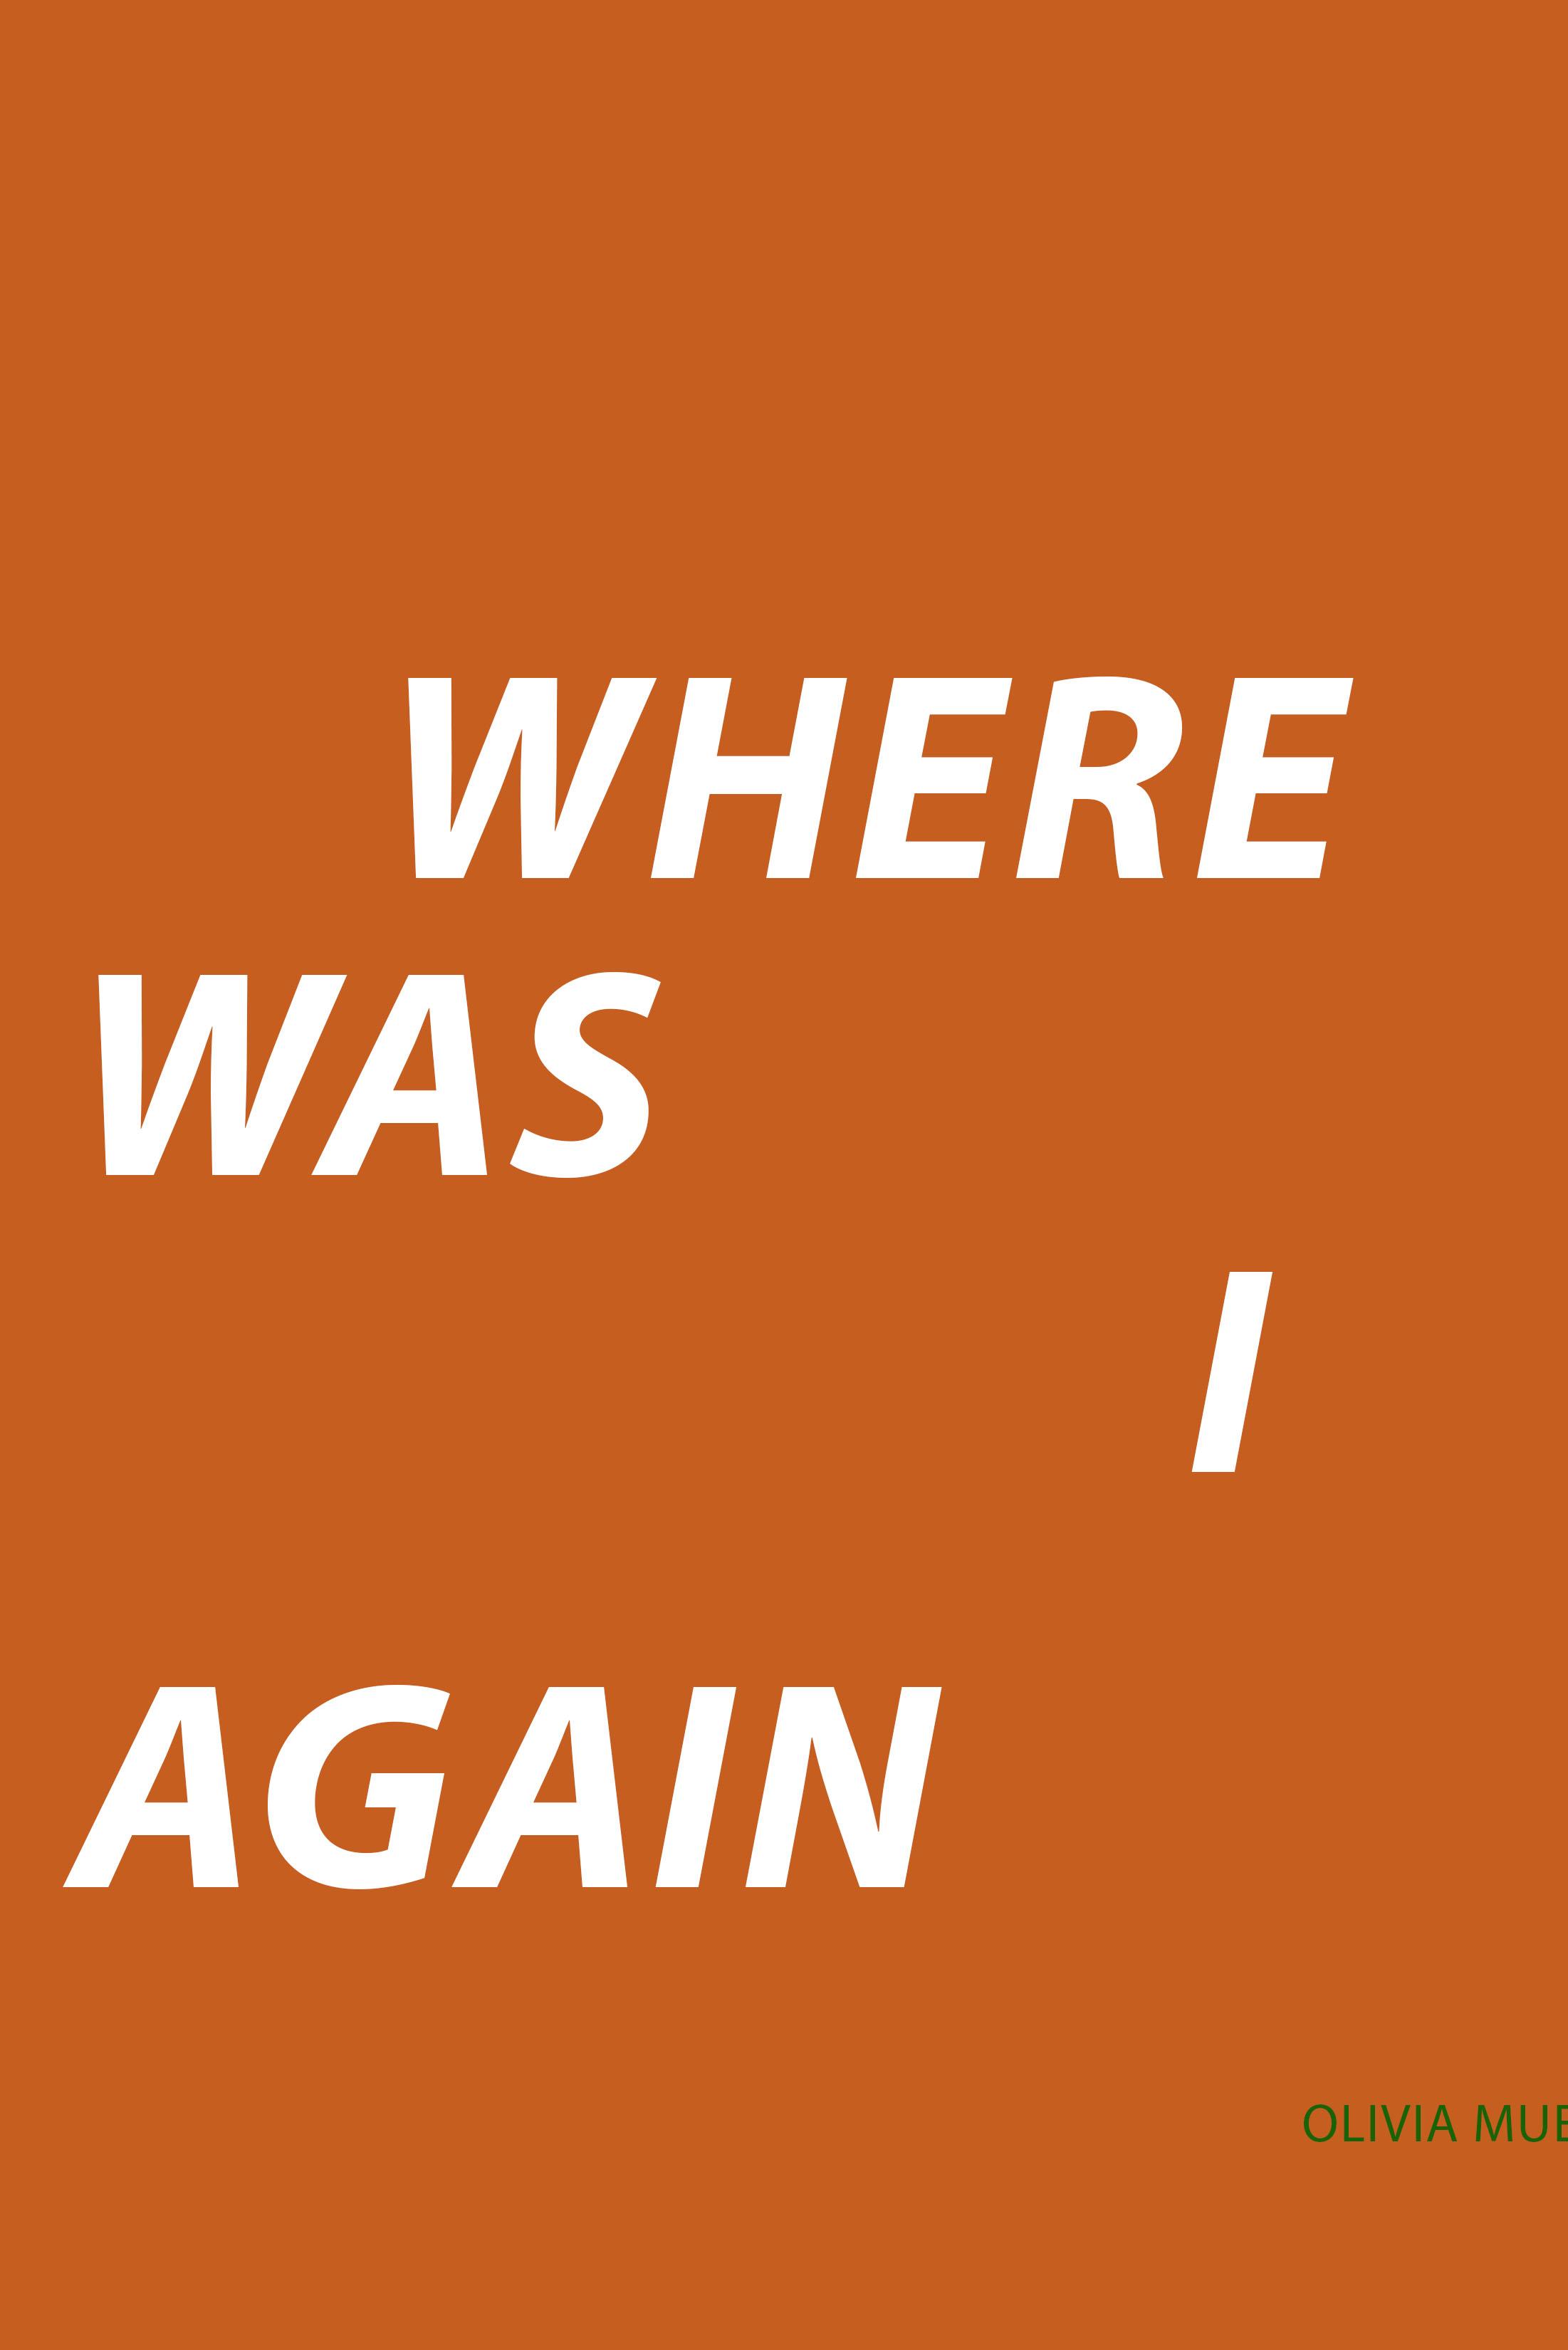 Book cover of Where Was I Again by Olivia Muenz